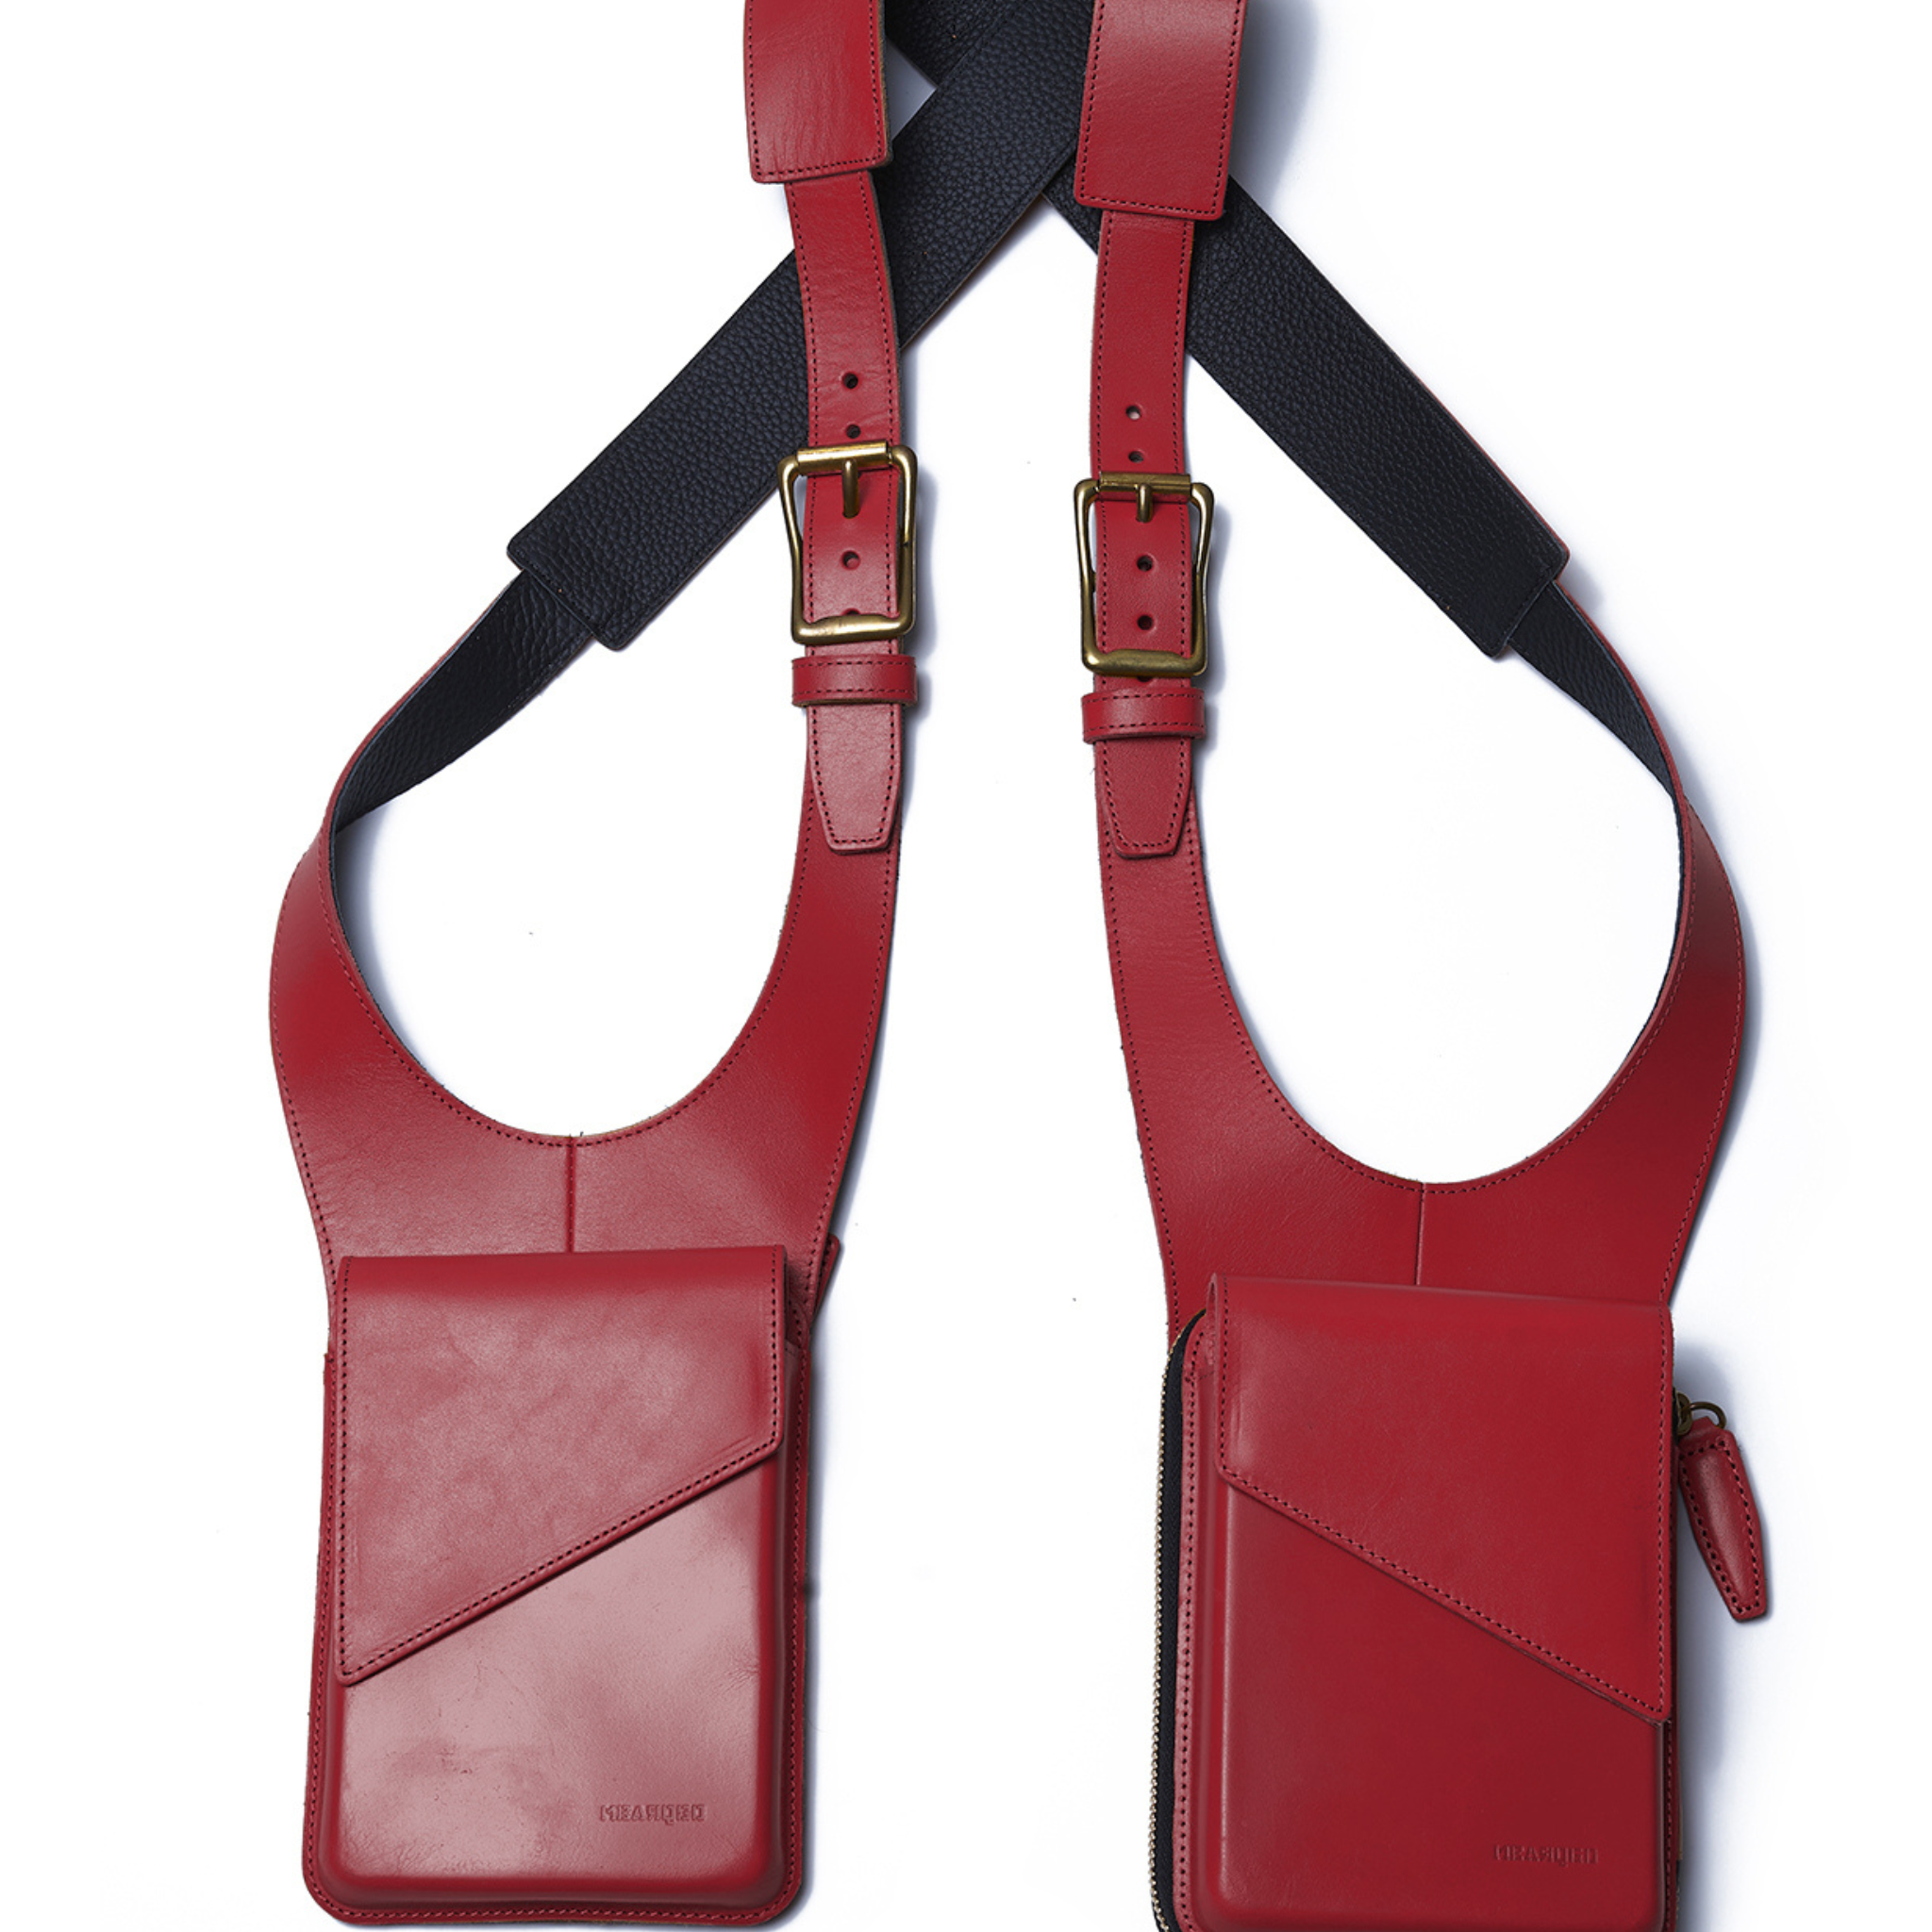 The Toast Deux Bordeaux by MBARQGO. A dual holster bag.